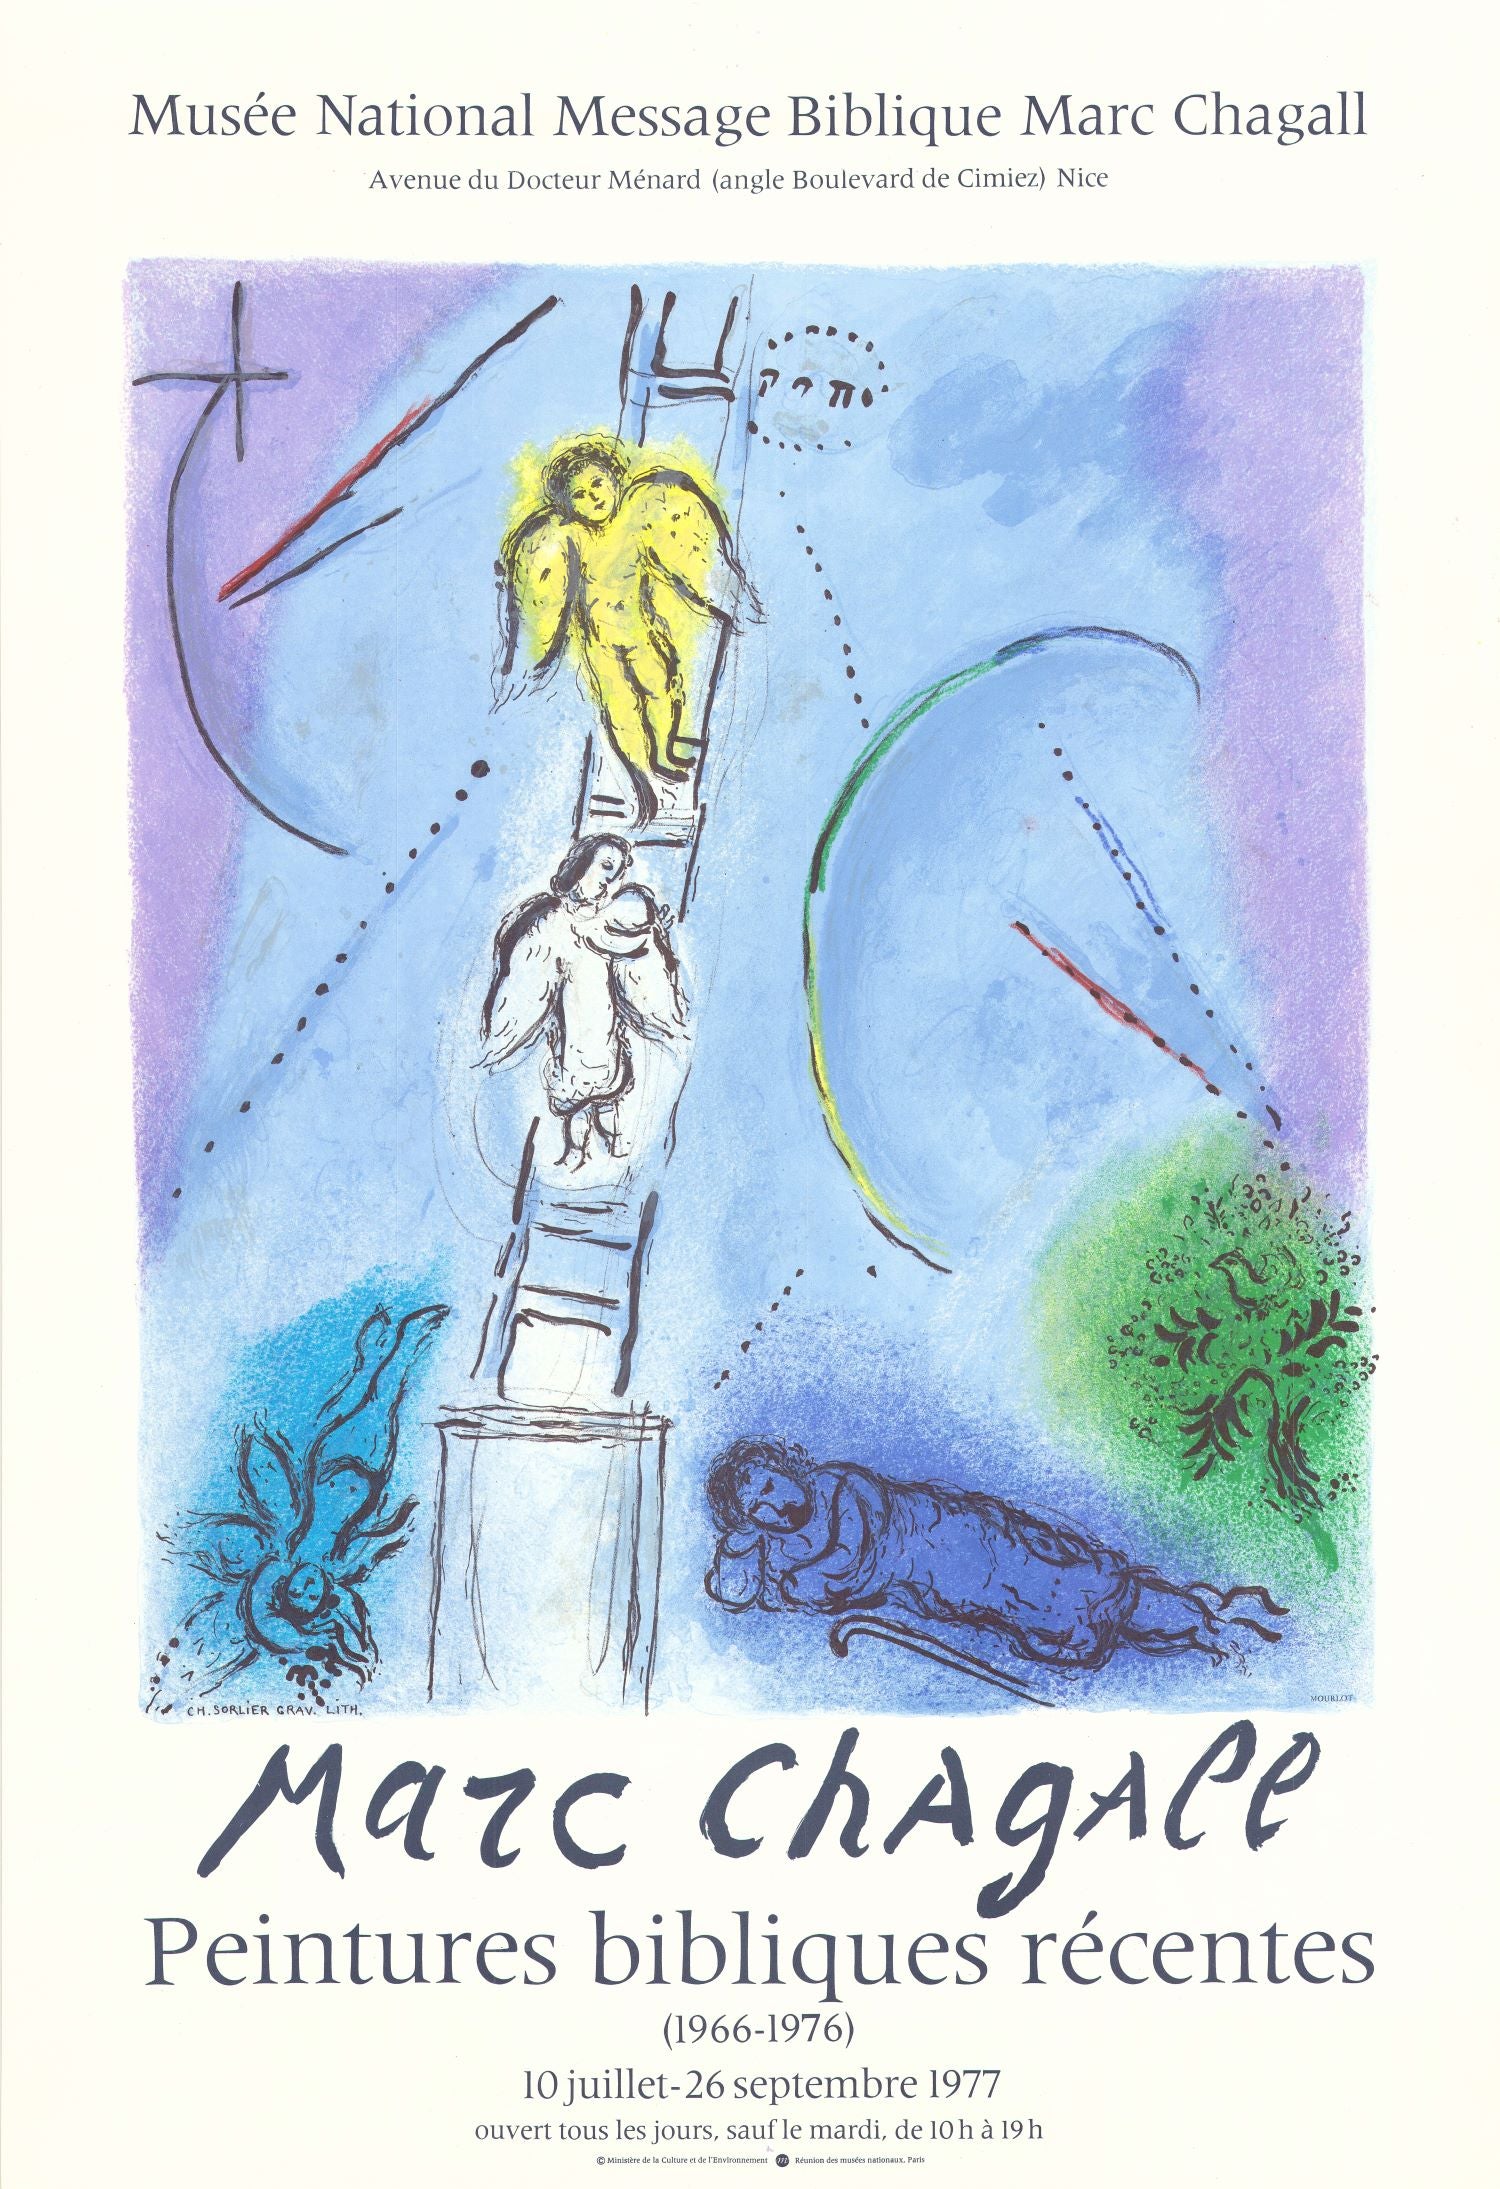 Musee National Message Biblique Marc Chagall, Nice 1977